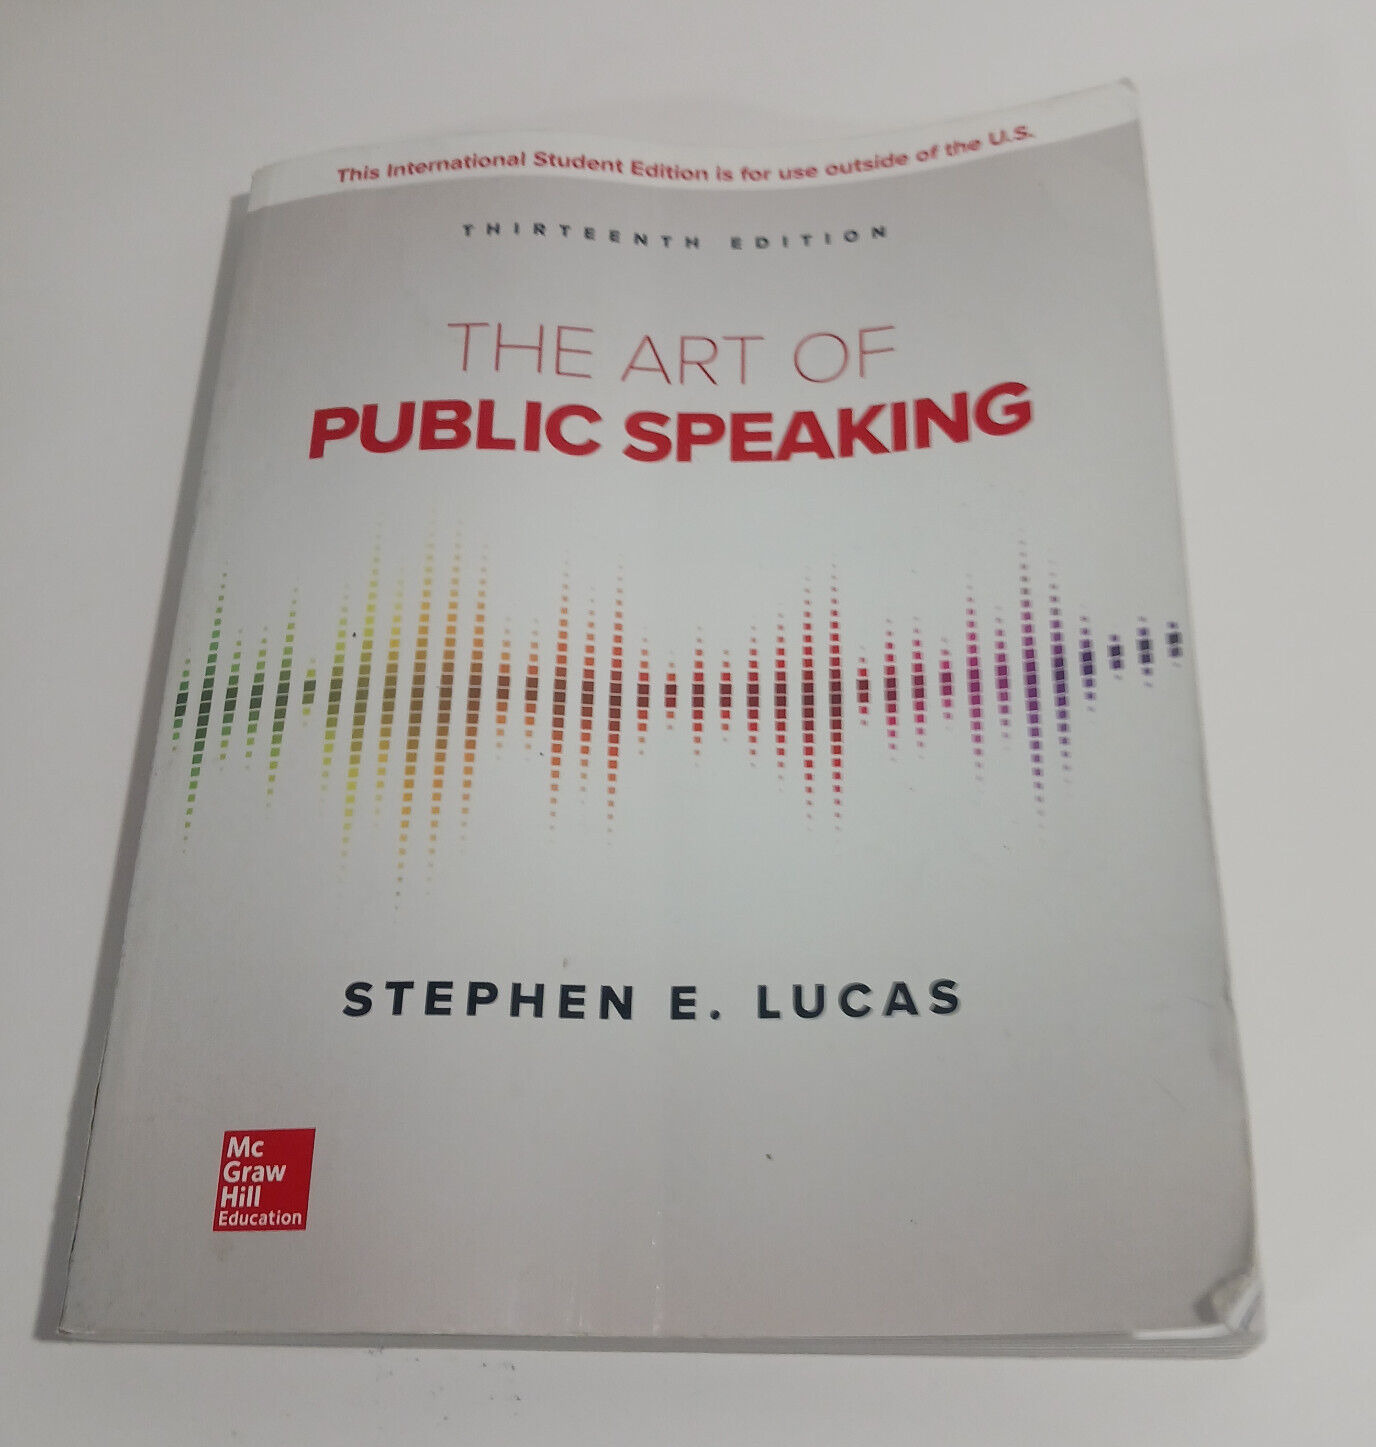 The Art of Public Speaking 13 Edition - Stephen Lucas/McGraw Hill Paperback